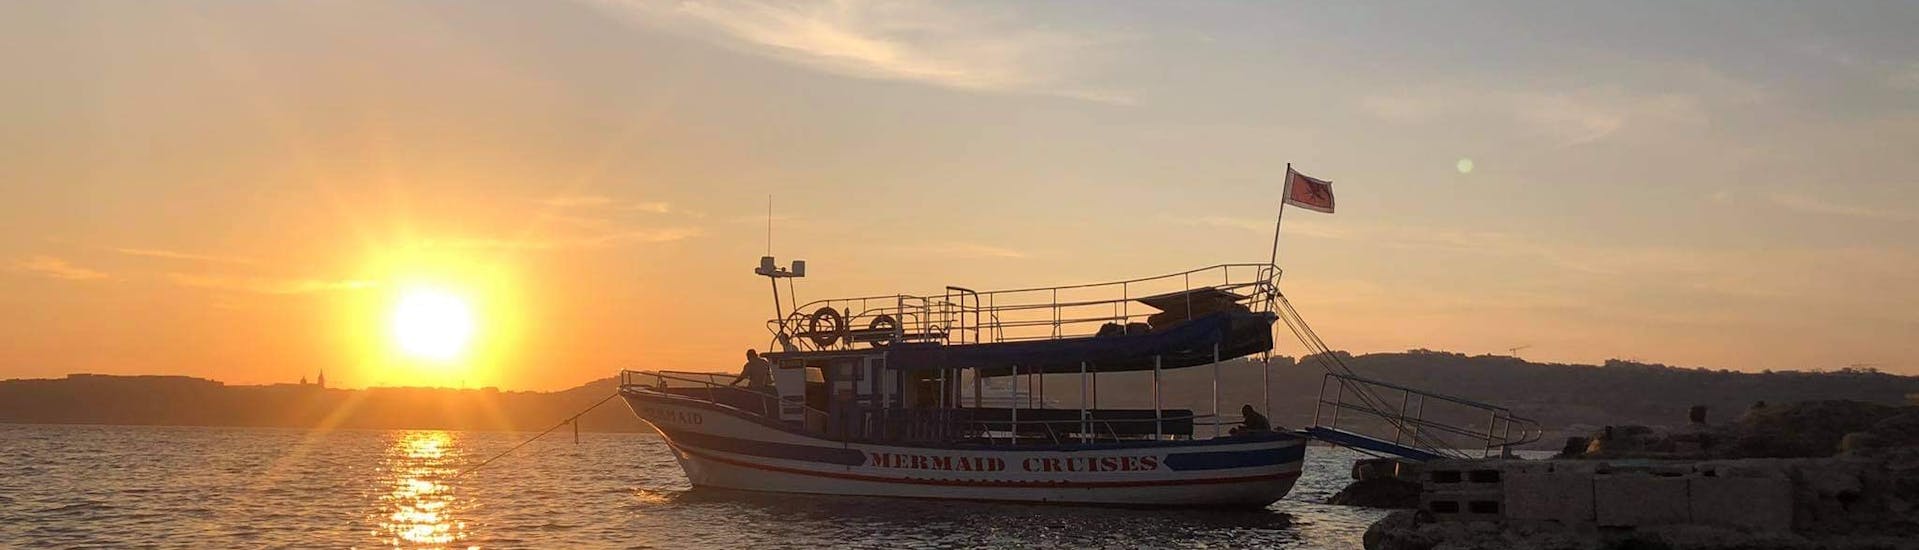 Our boat over the water in the middle of the sunset during the Sunset Cruise to the Blue Lagoon on Comino with Mermaid Cruises Malta.